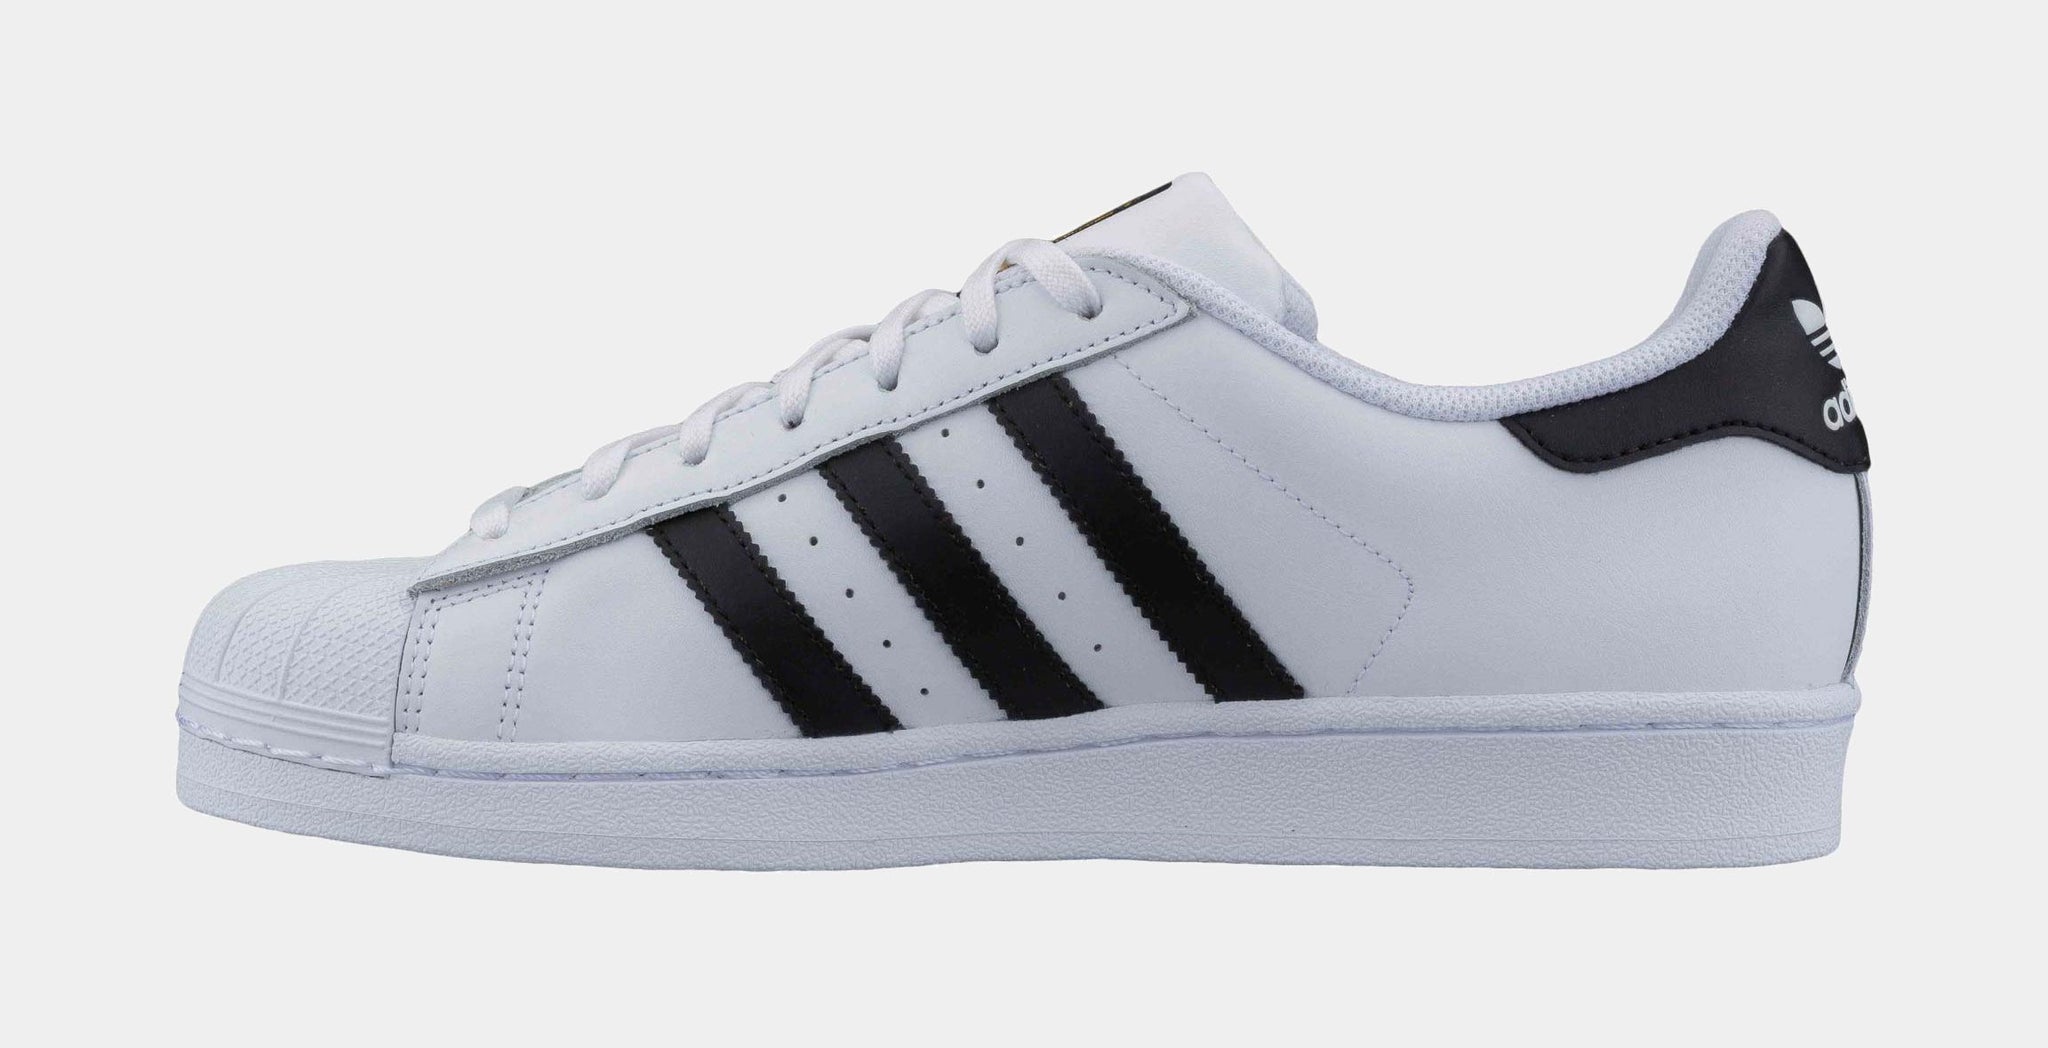 Buy adidas Superstar shoes